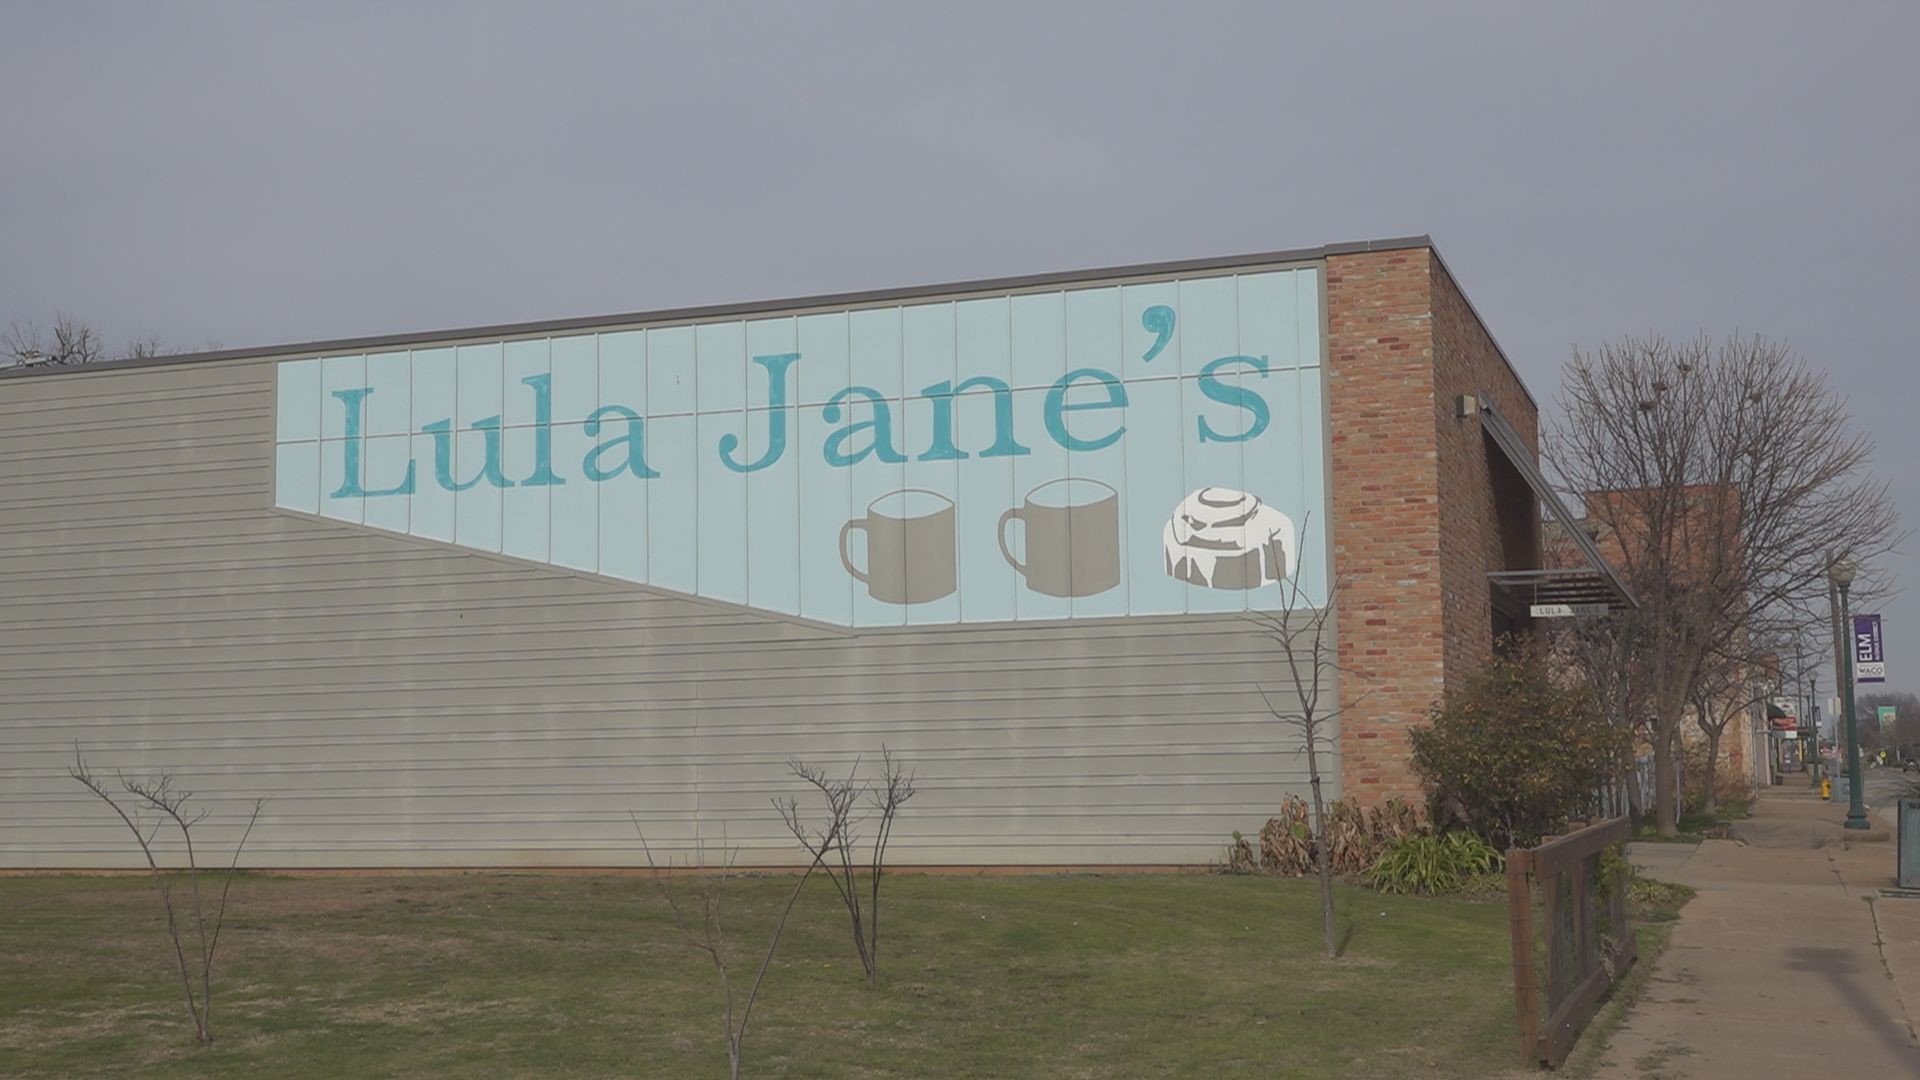 Lula Jane's was the first farm-to-table restaurant in McLennan County. Besides serving up good food, the owner says they're also committed to giving back.